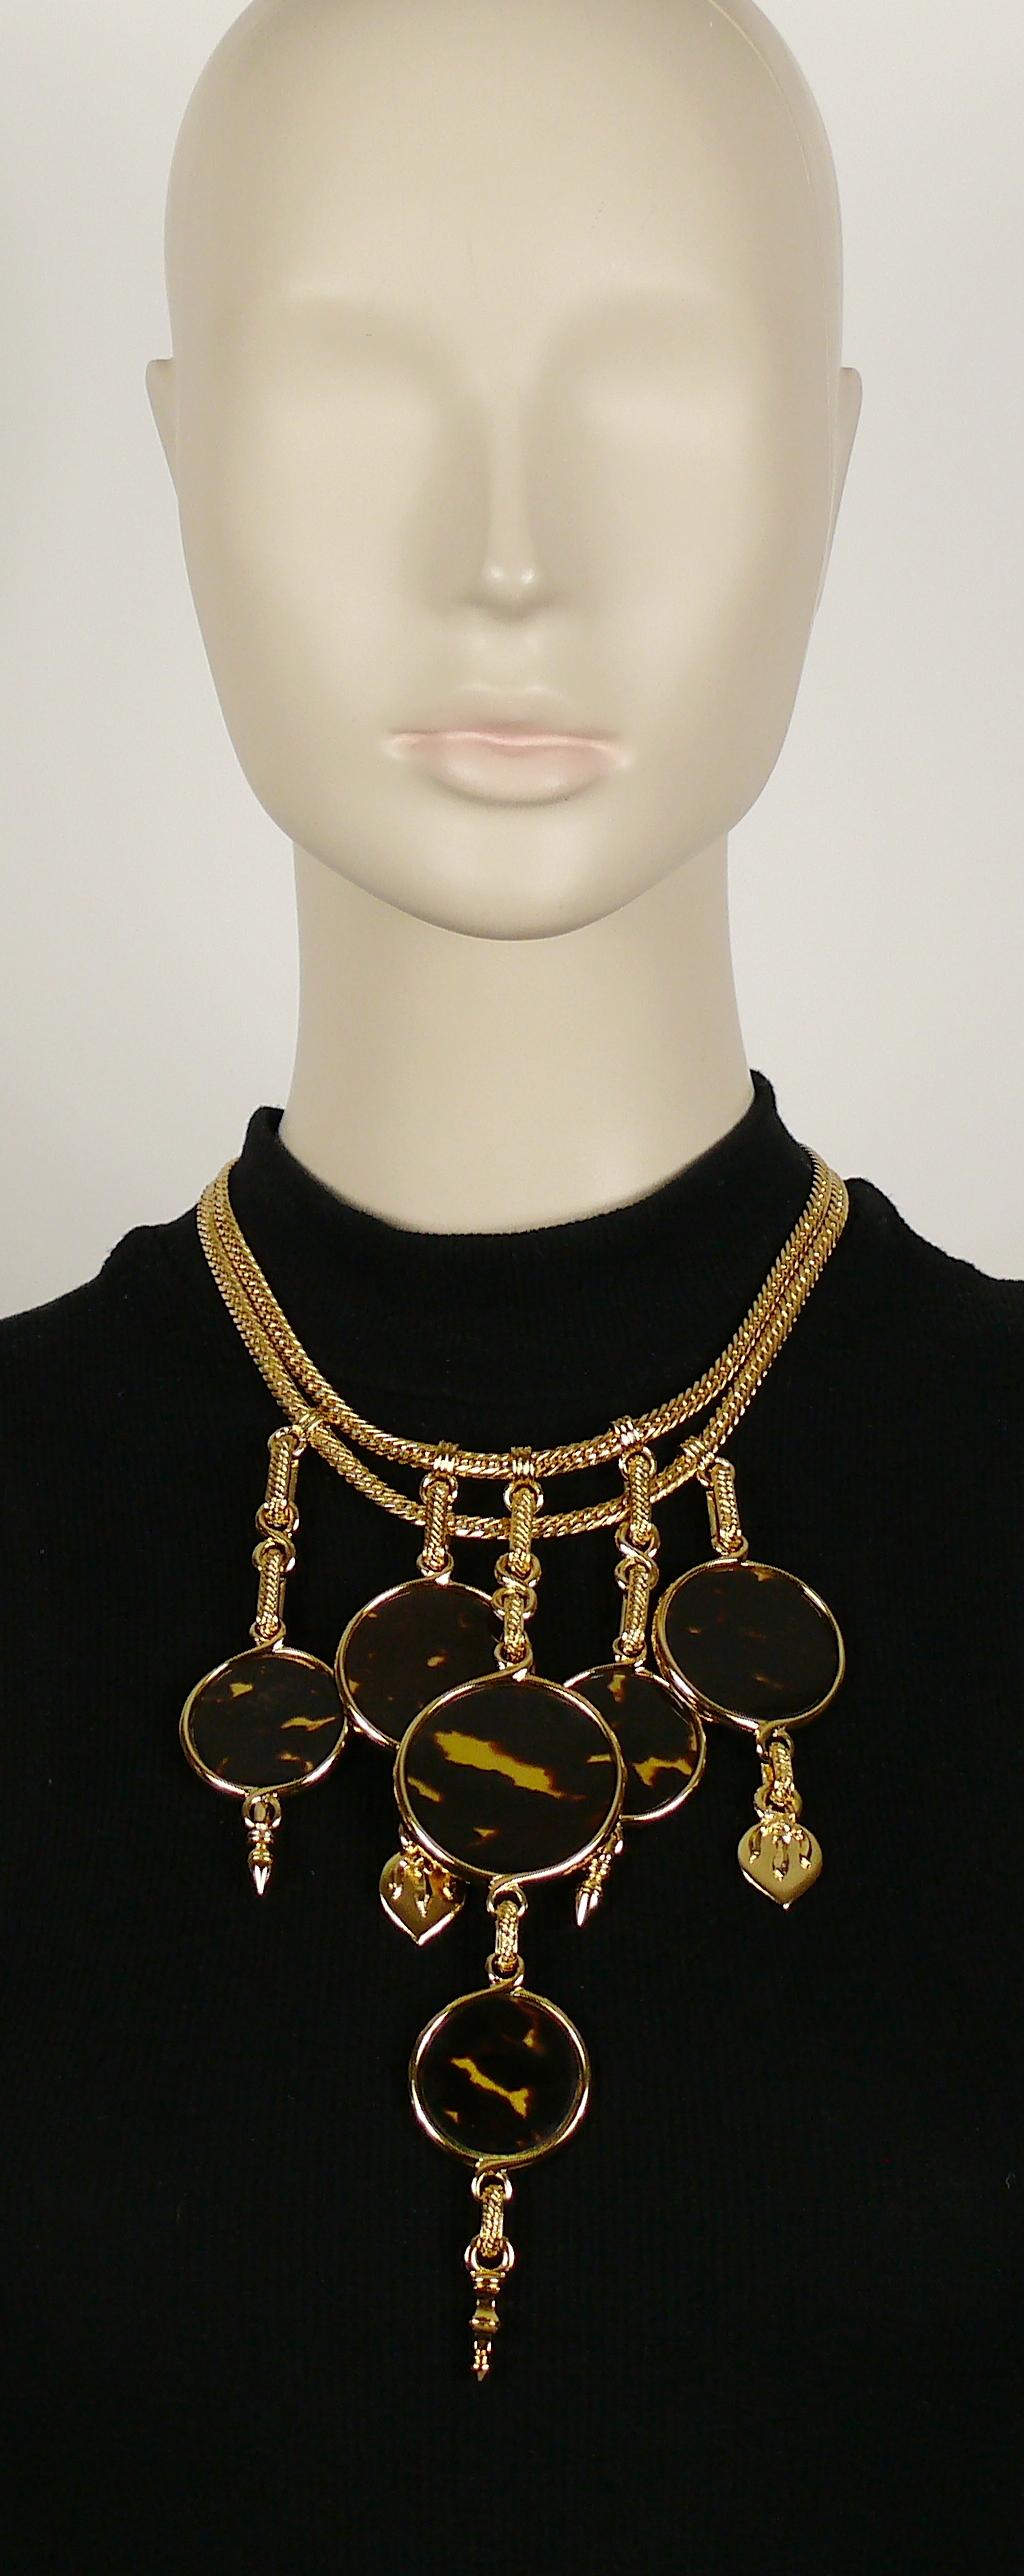 YVES SAINT LAURENT vintage gold toned chain statement necklace featuring 6 faux tortoise shell discs with charms.

Lobster clasp closure.
Adjustable length.

Can be worn on both sides.

Embossed YSL Made in France.

Indicative measurements :